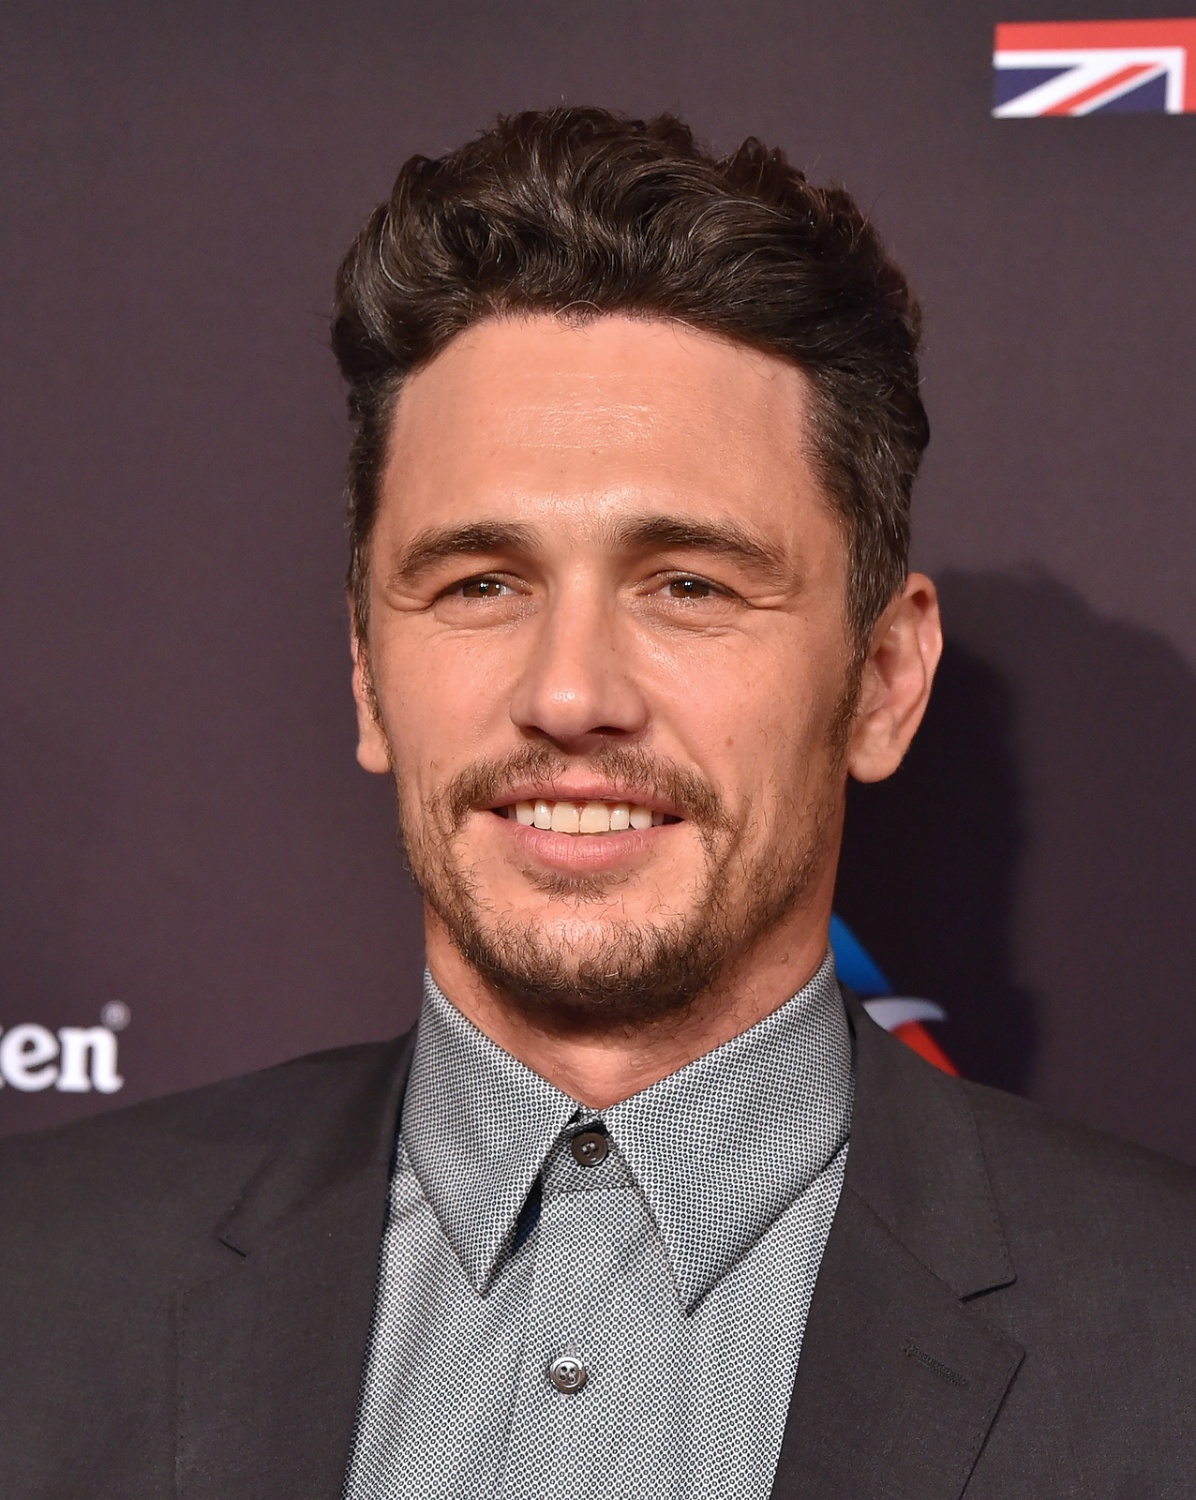 Acting Students Accuse James Franco of Sexual Harassment in Lawsuit